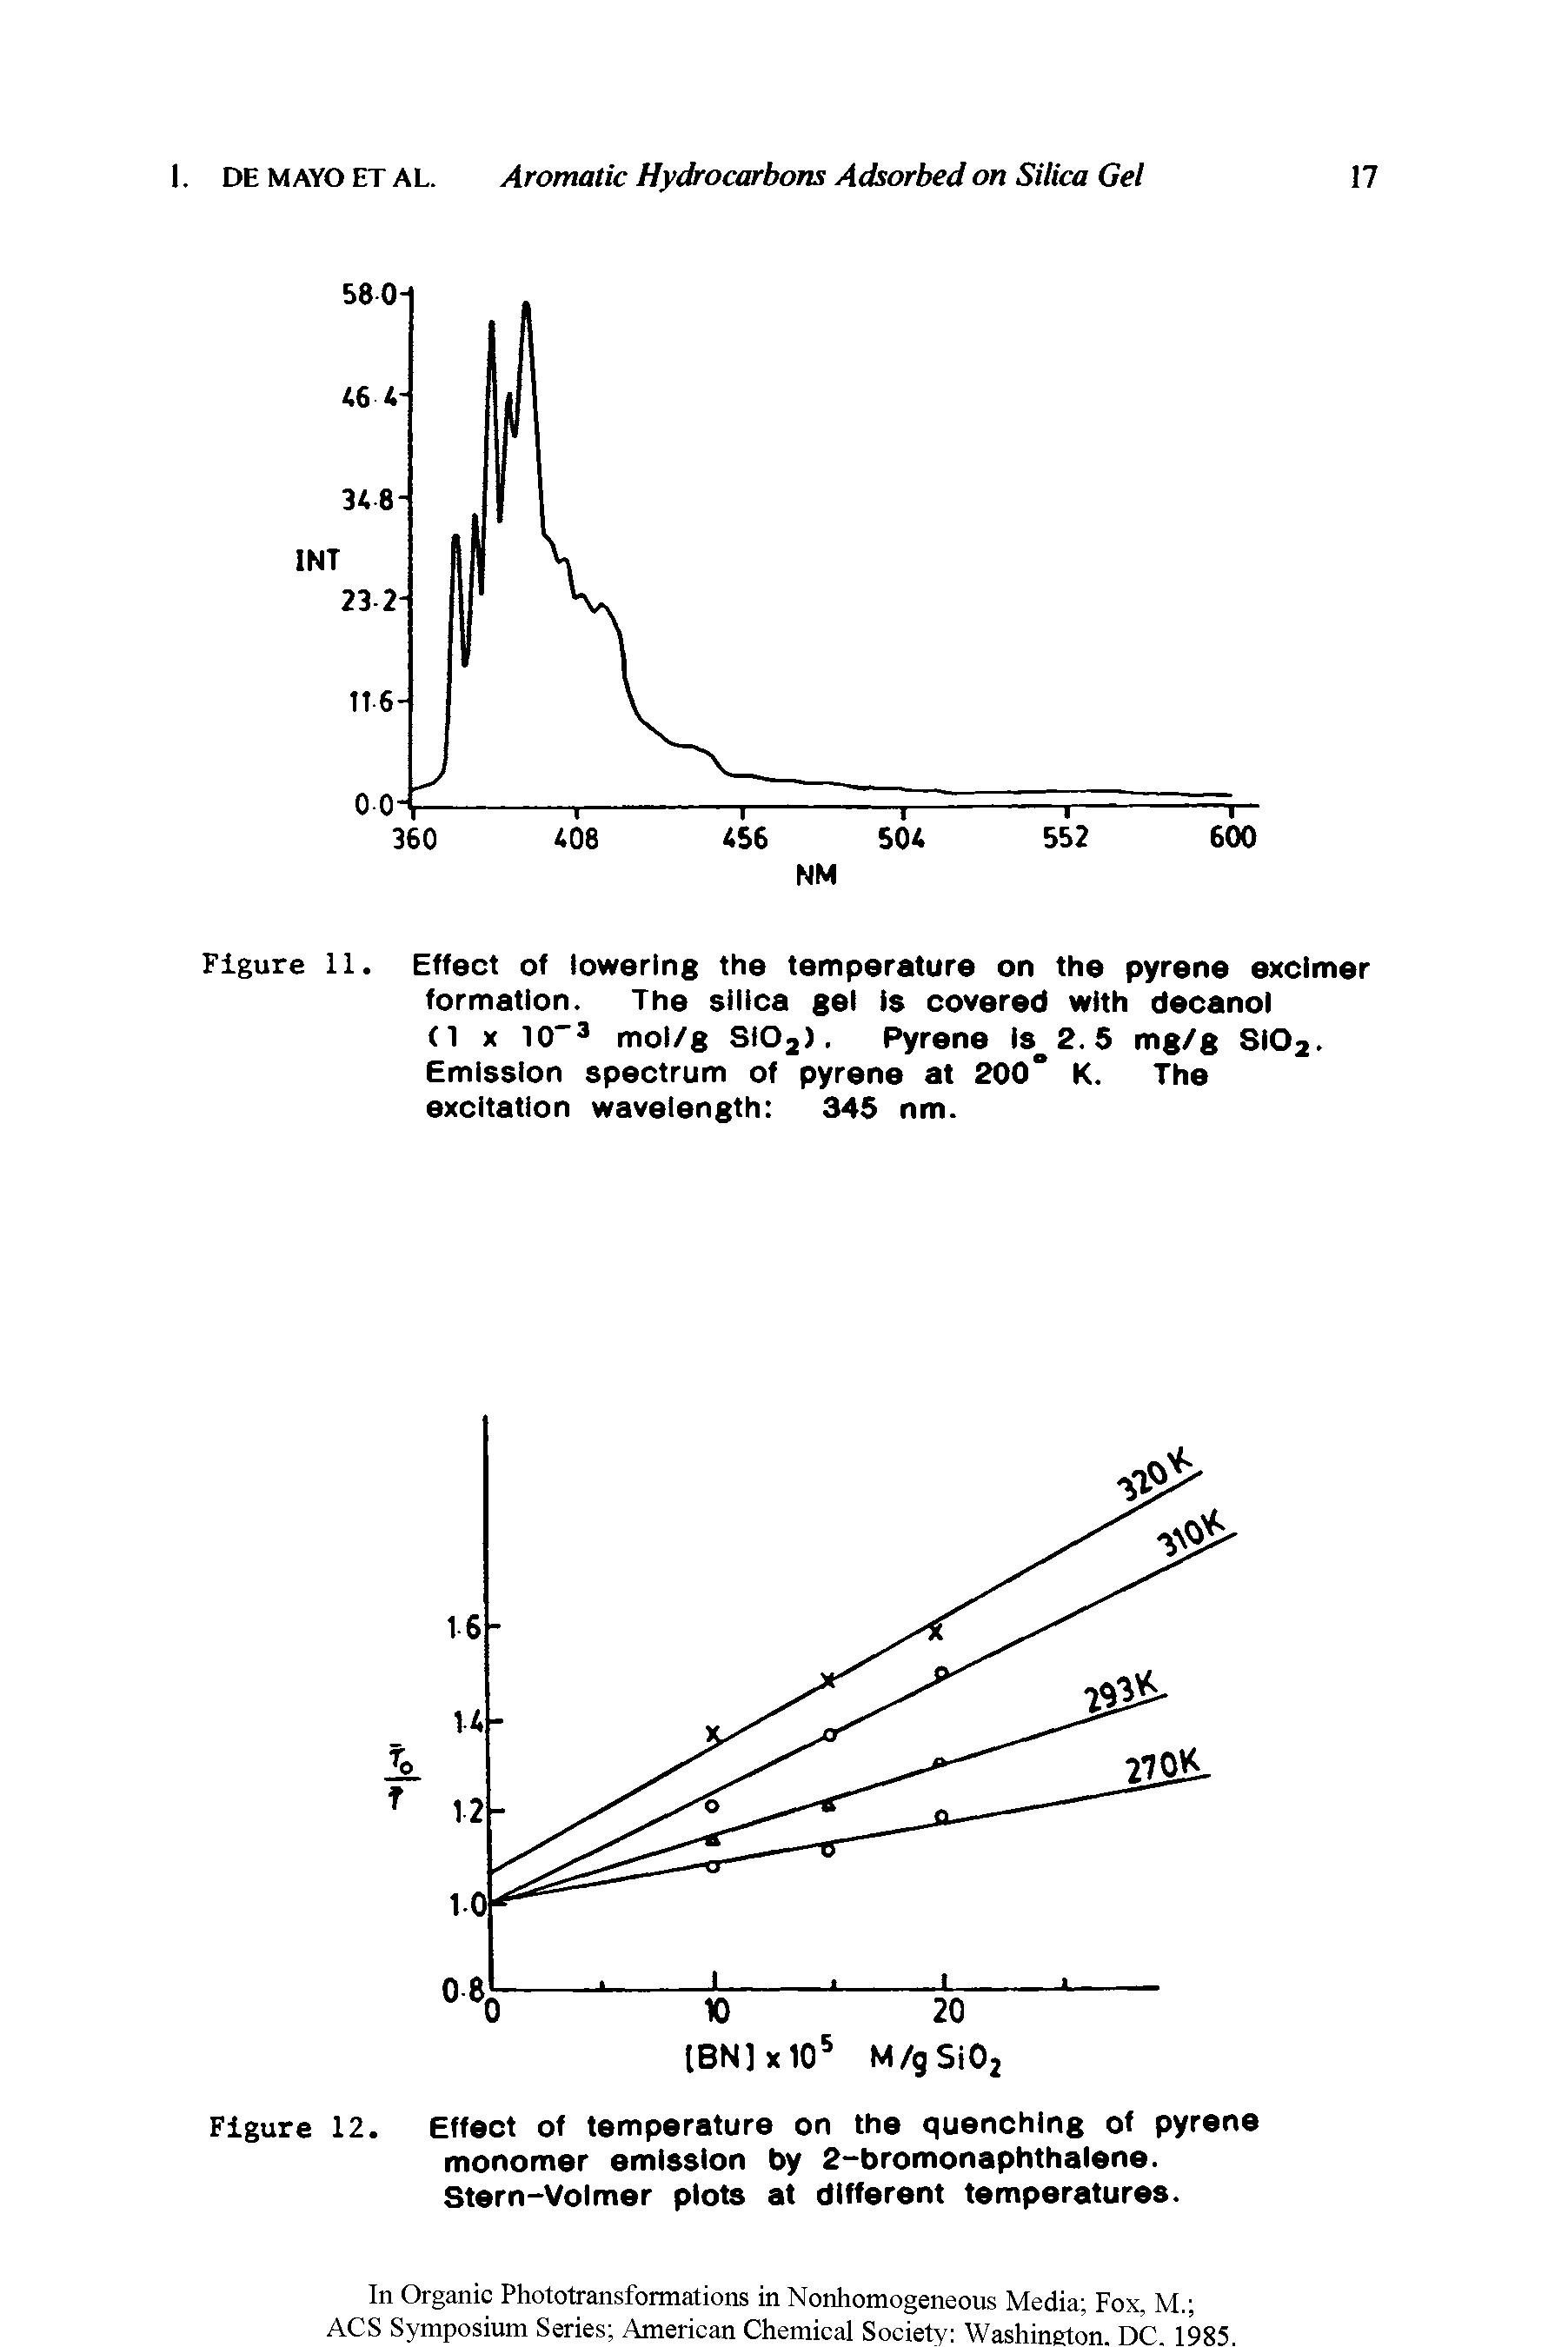 Figure 12. Effect of temperature on the quenching of pyrene monomer emission by 2-bromonaphthalene. Stern-Volmer plots at different temperatures.